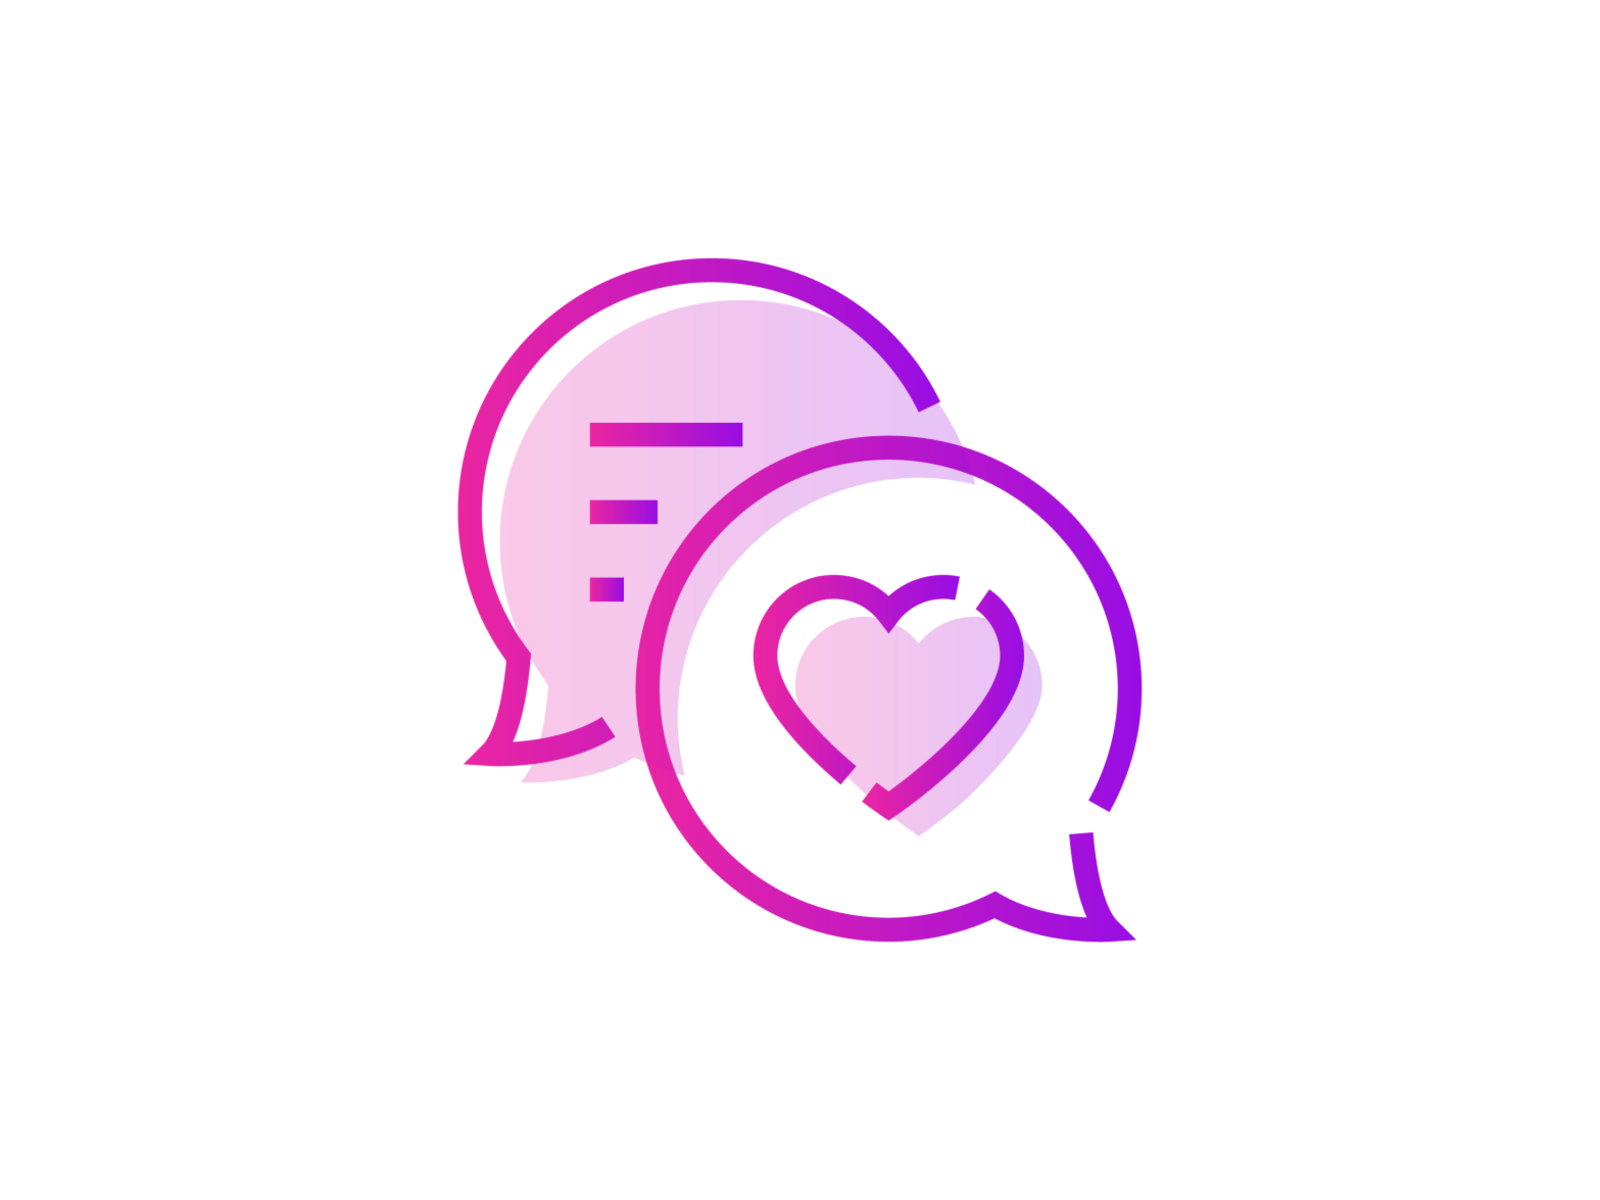 Love chatting 💕👇 art bubbles chat chatting comment communication couple design discuss gradient graphic heart icon love message sms talk text vector